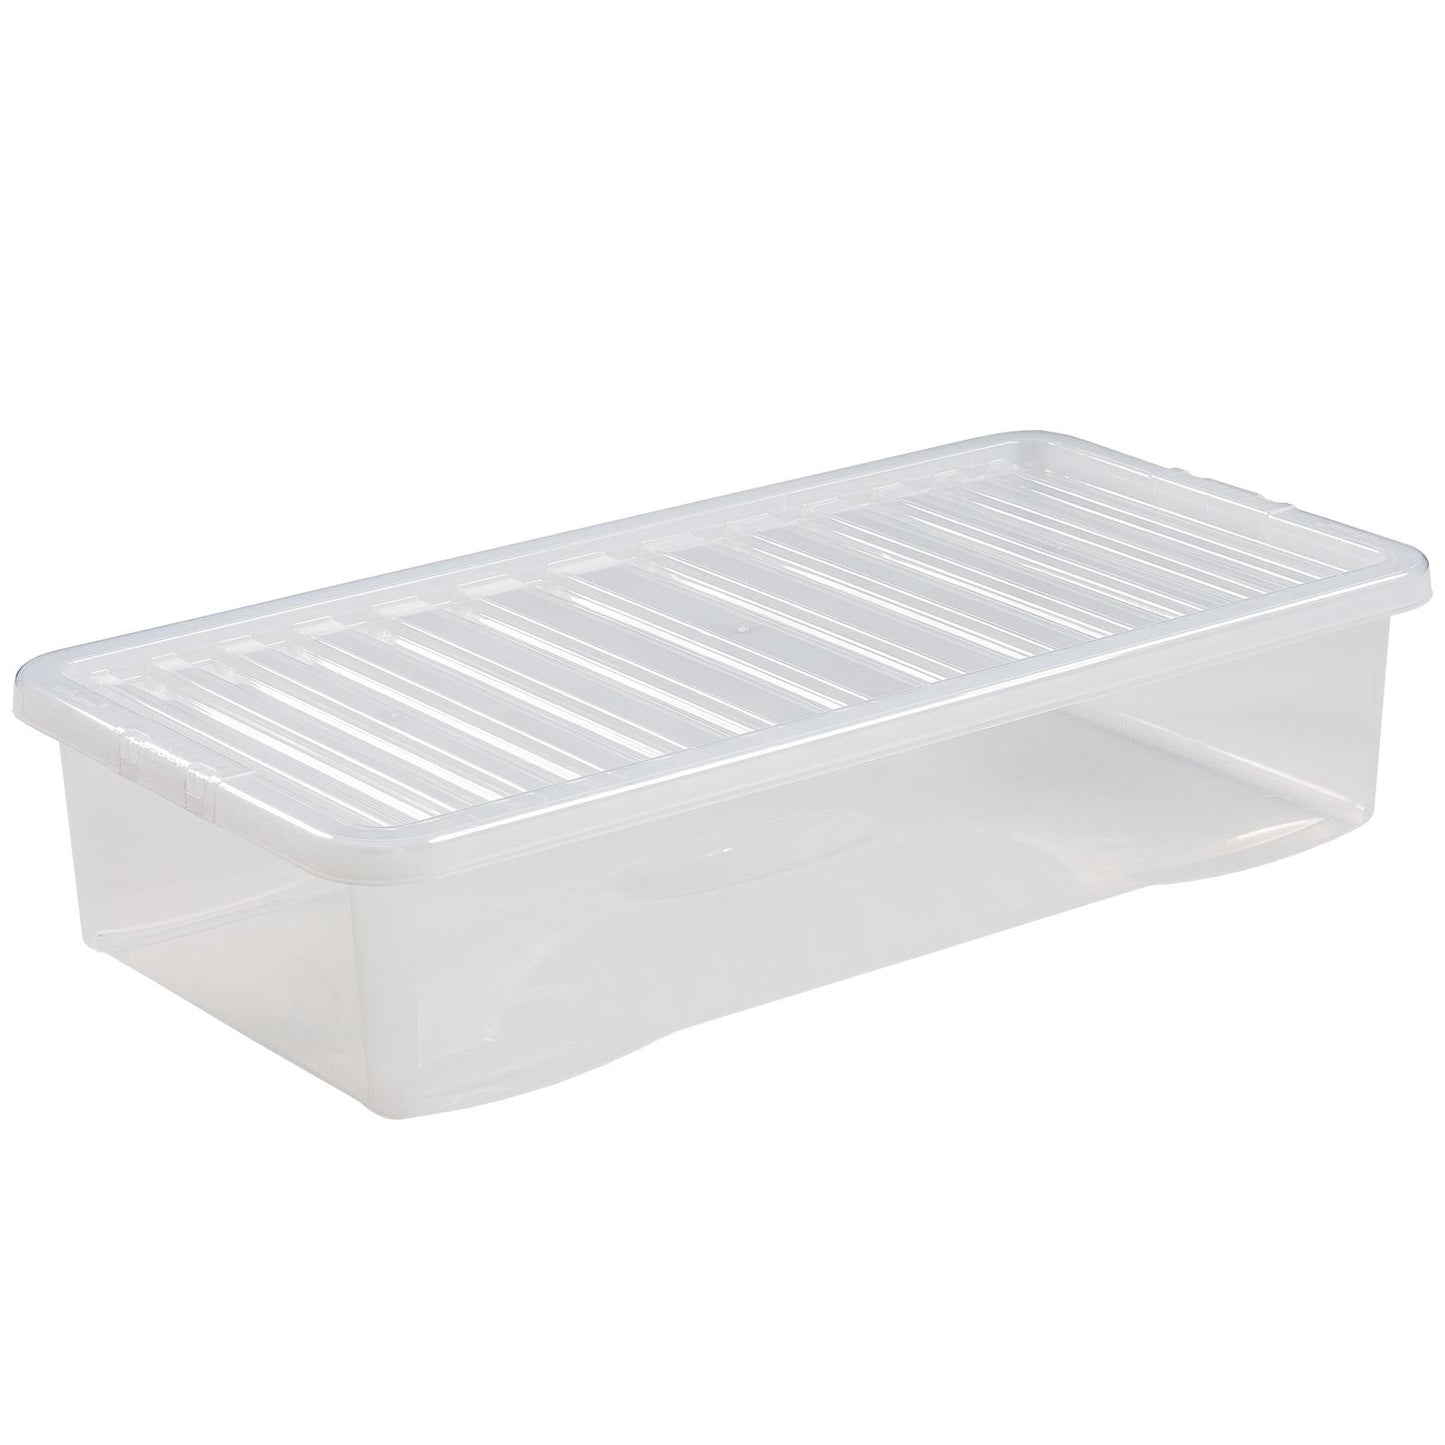 Beautiful Crystal Storage Box for Jewelry and Small Items